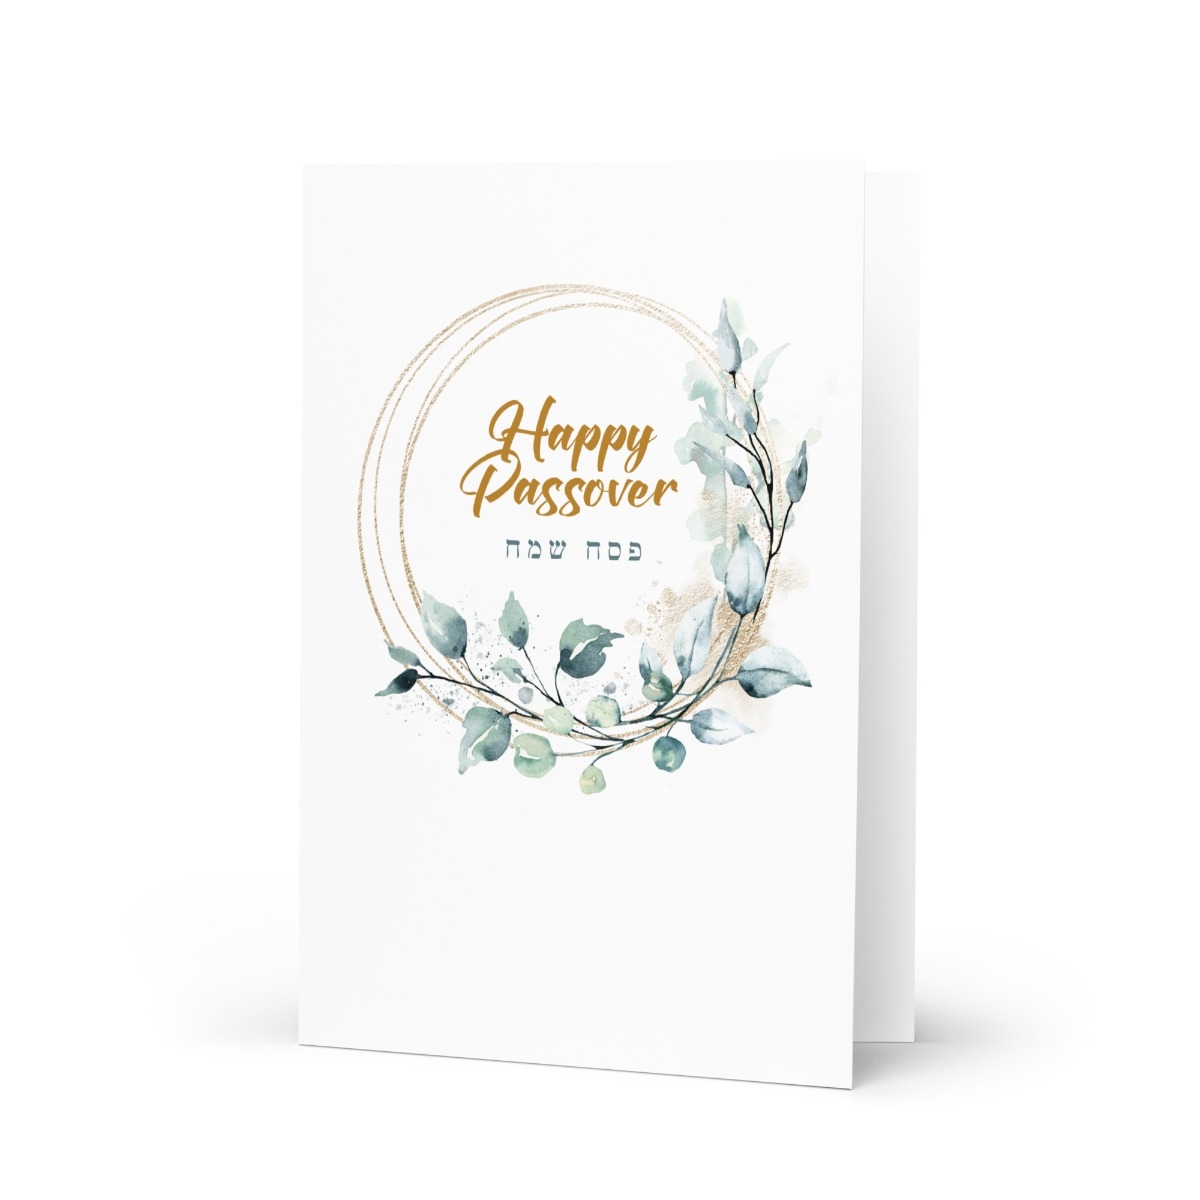 Happy Passover Greeting Card - Green and Gold  - 1